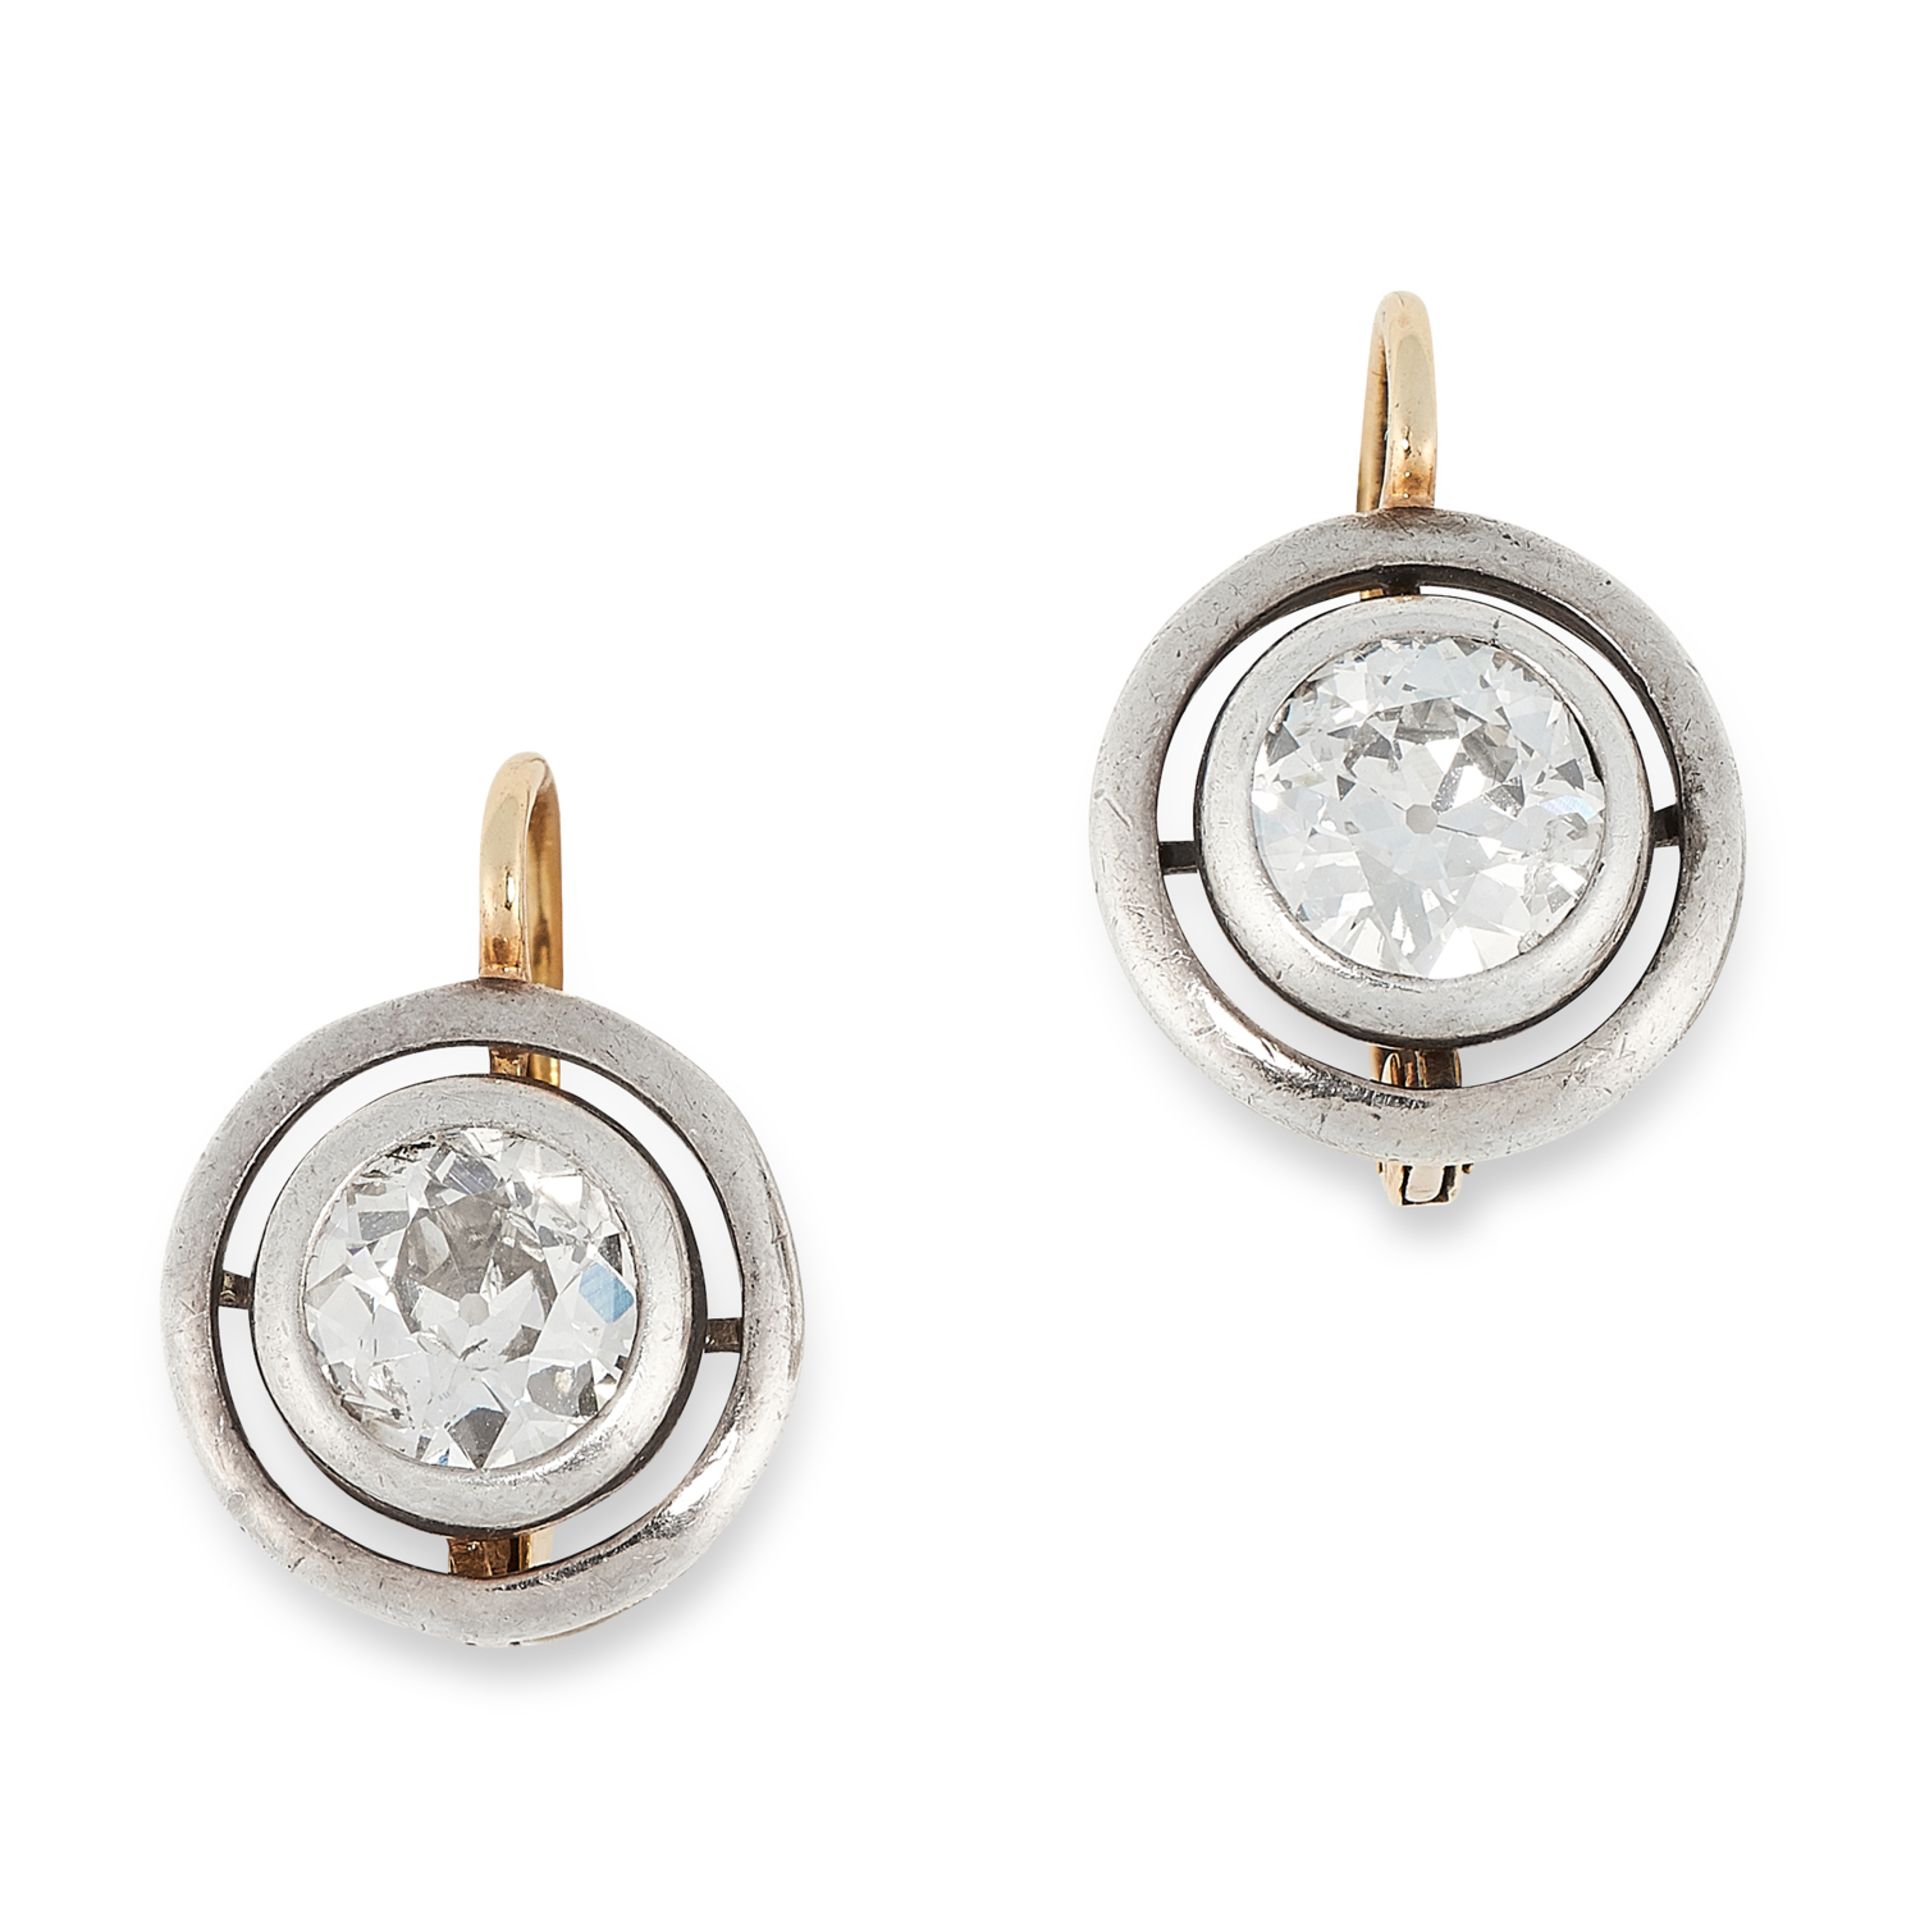 A PAIR OF ANTIQUE DIAMOND EARRINGS in yellow gold, each set with an old cut diamond totalling 1.8-